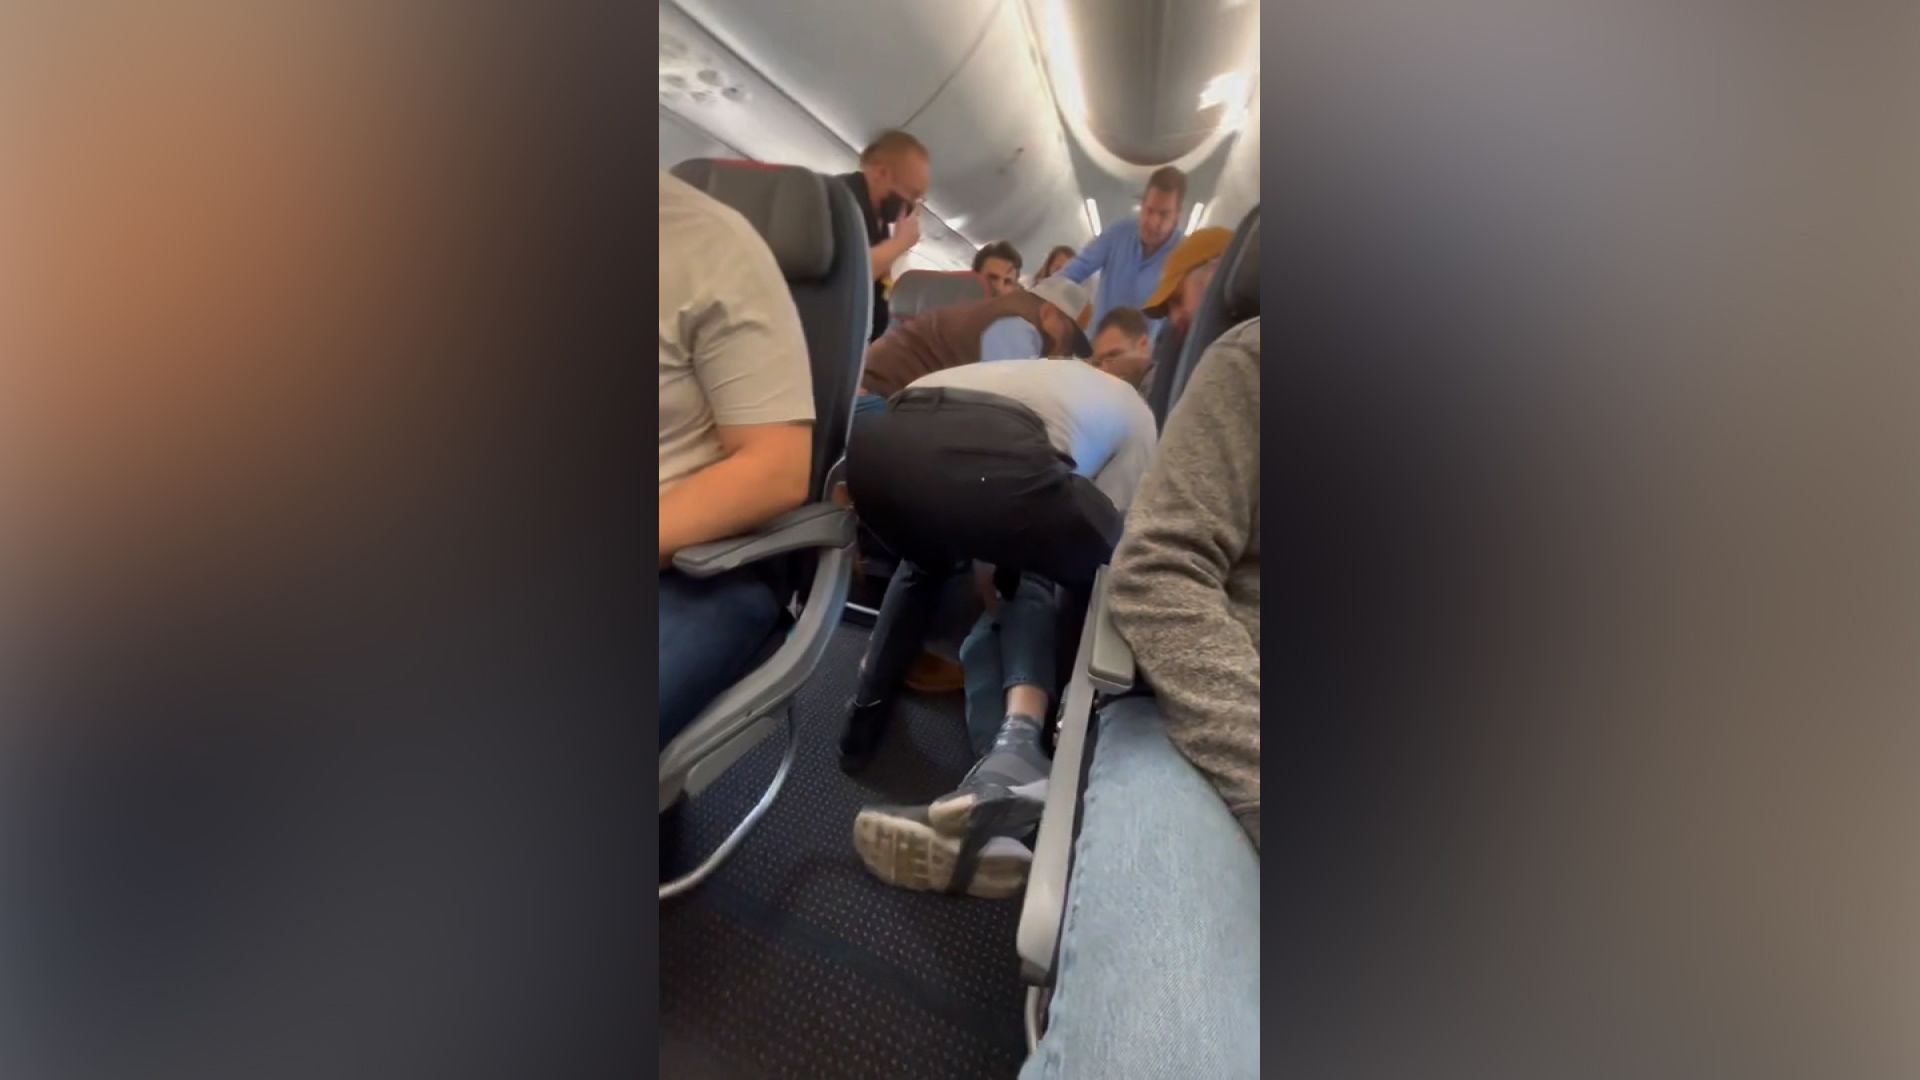 A flight from Albuquerque, New Mexico, was forced to turn around when a disruptive passenger tried to open an emergency exit Tuesday, passengers said.